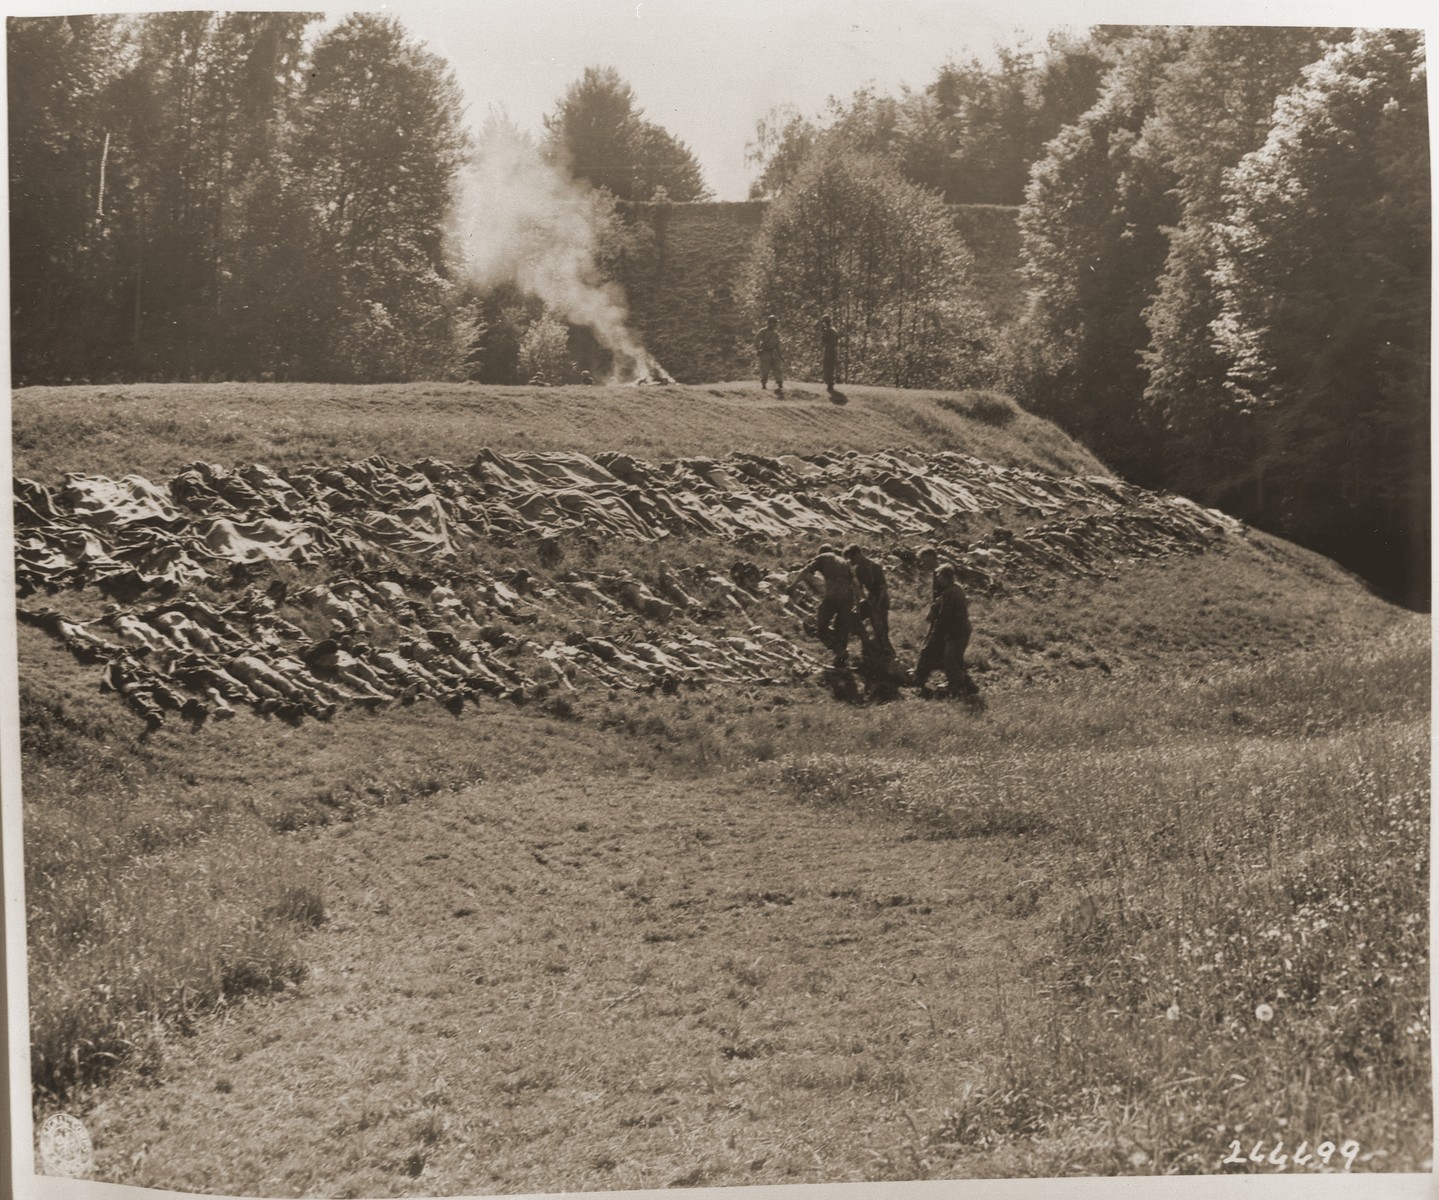 Bodies exhumed from a mass grave near the town of Nammering are laid out on a hillside.